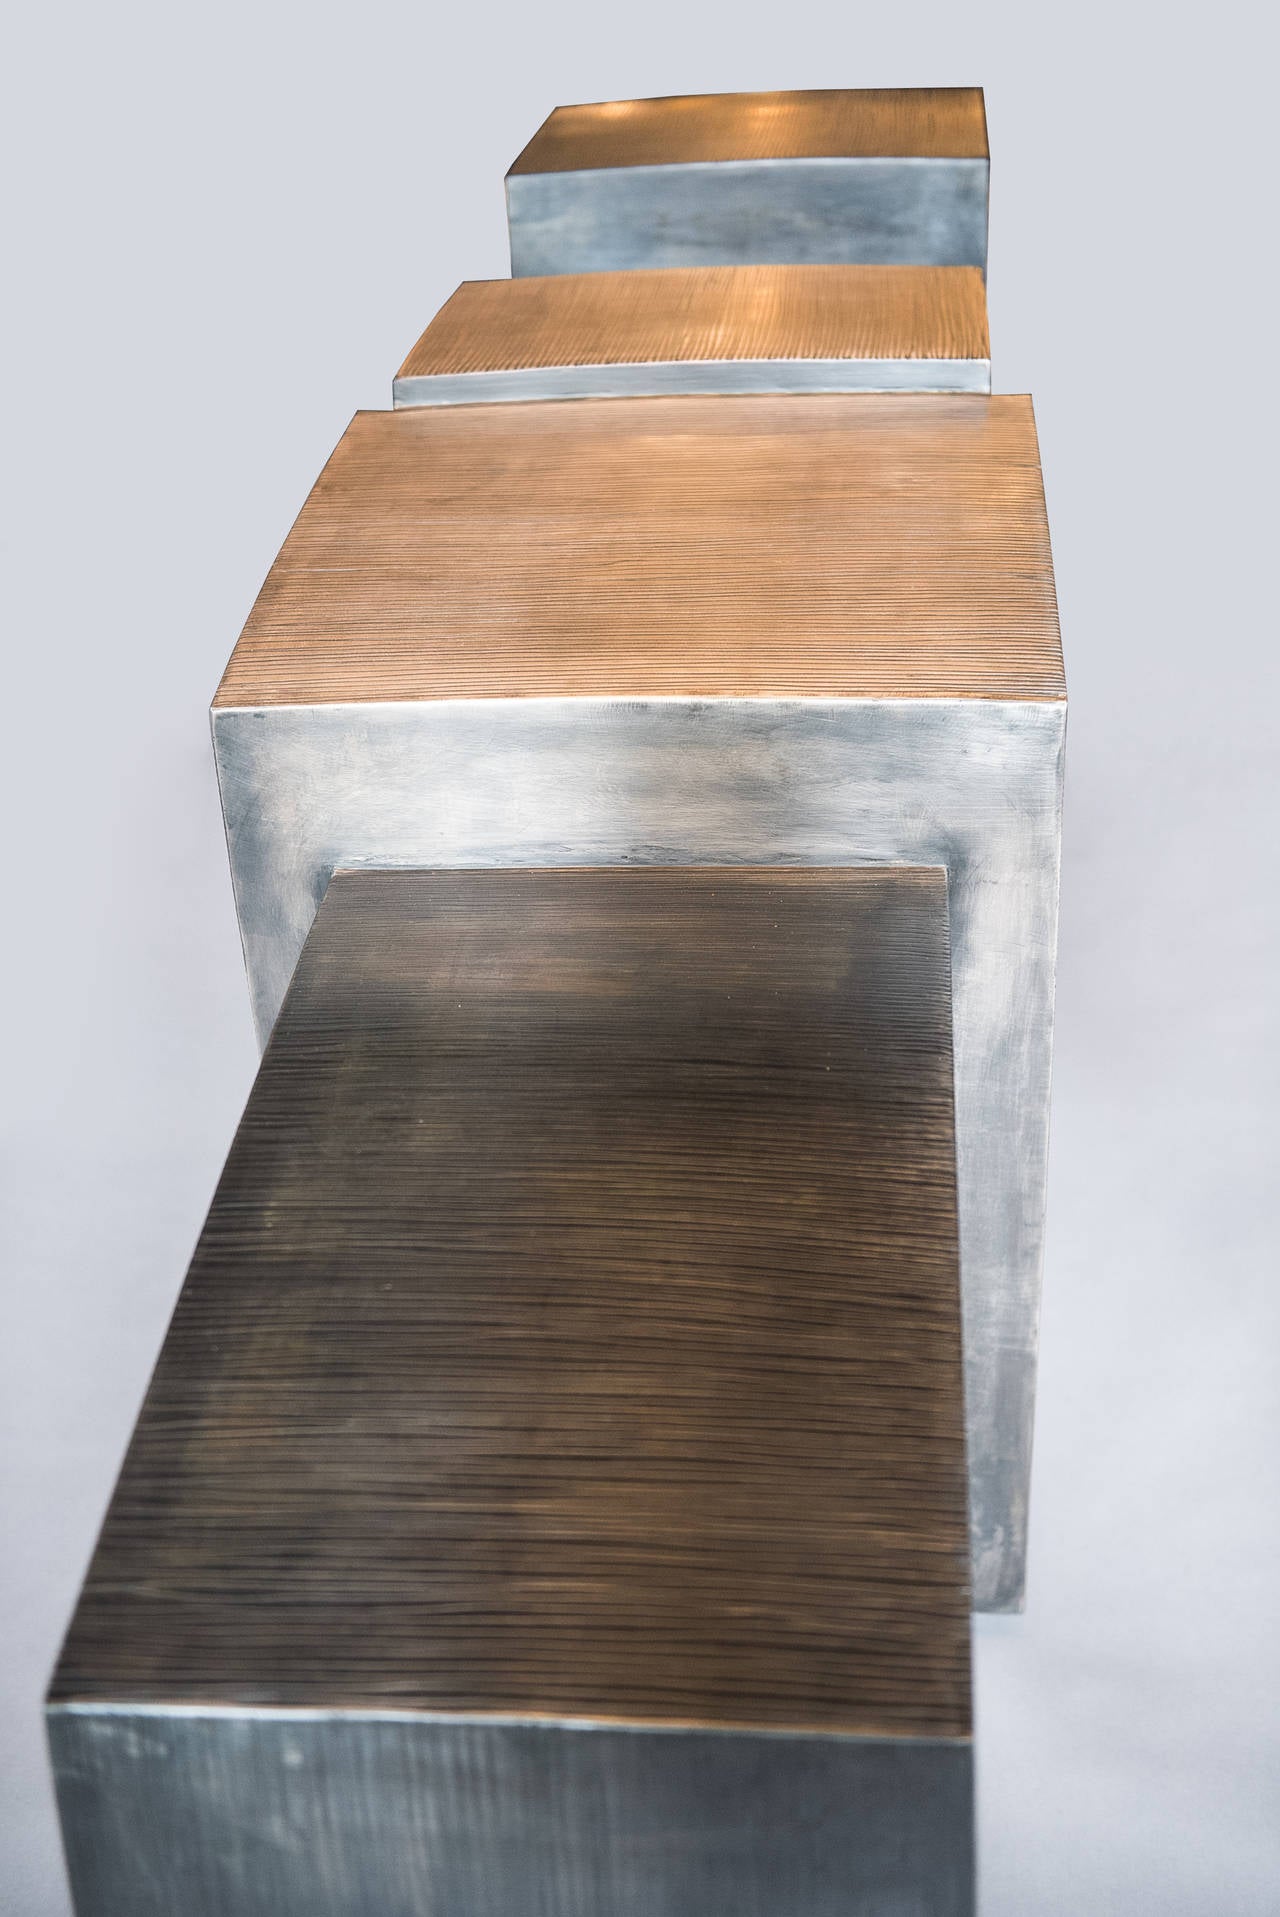 Gary Magakis’ blacked steel and bronze console epitomizes the sculptor’s distinct approach to creating bold metal and dense geometric forms that simultaneously exude an elegant, buoyant aesthetic of Modernism.

Inspired by Russian Constructivism